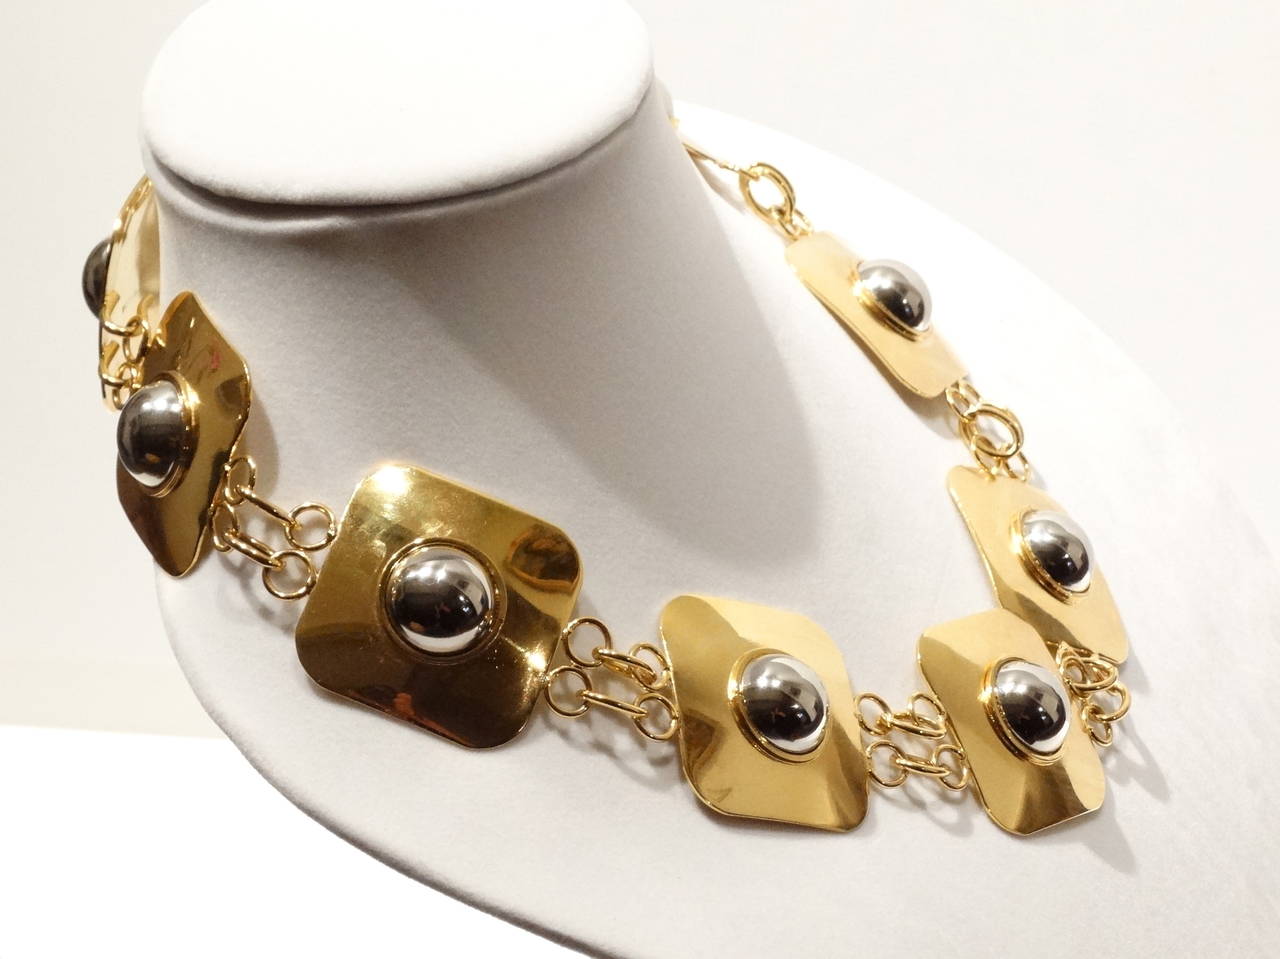 Stunning, 1970's Mod Givenchy Runway Collar Necklace Mirrored Plated Gold and Silver Dome Accents. Stamped Givenchy and has a hang tag reading Givenchy. Such a great statement and love the mix of metals. Plated Gold and Plated Silver 